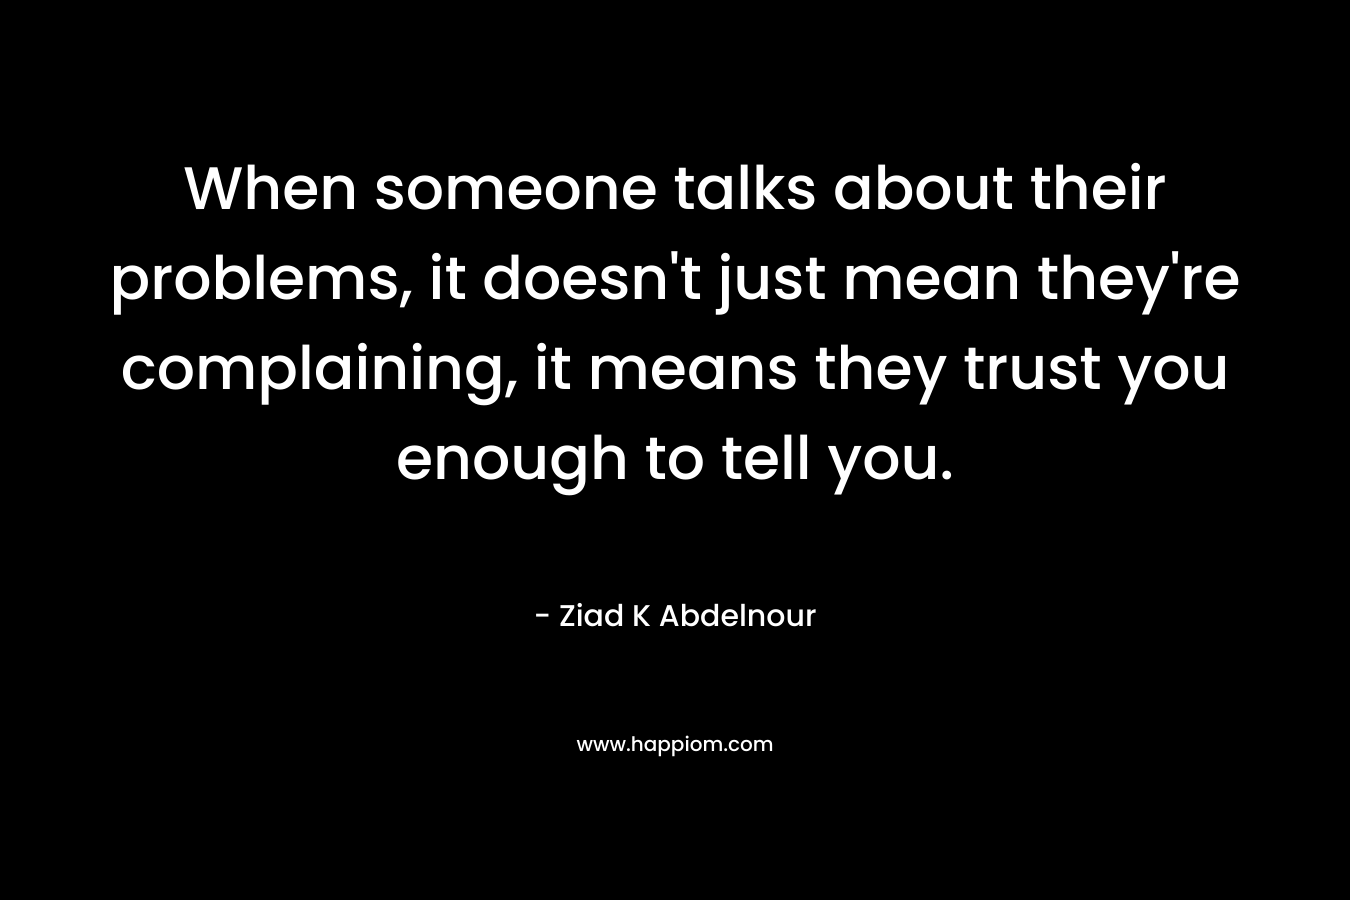 When someone talks about their problems, it doesn’t just mean they’re complaining, it means they trust you enough to tell you. – Ziad K Abdelnour